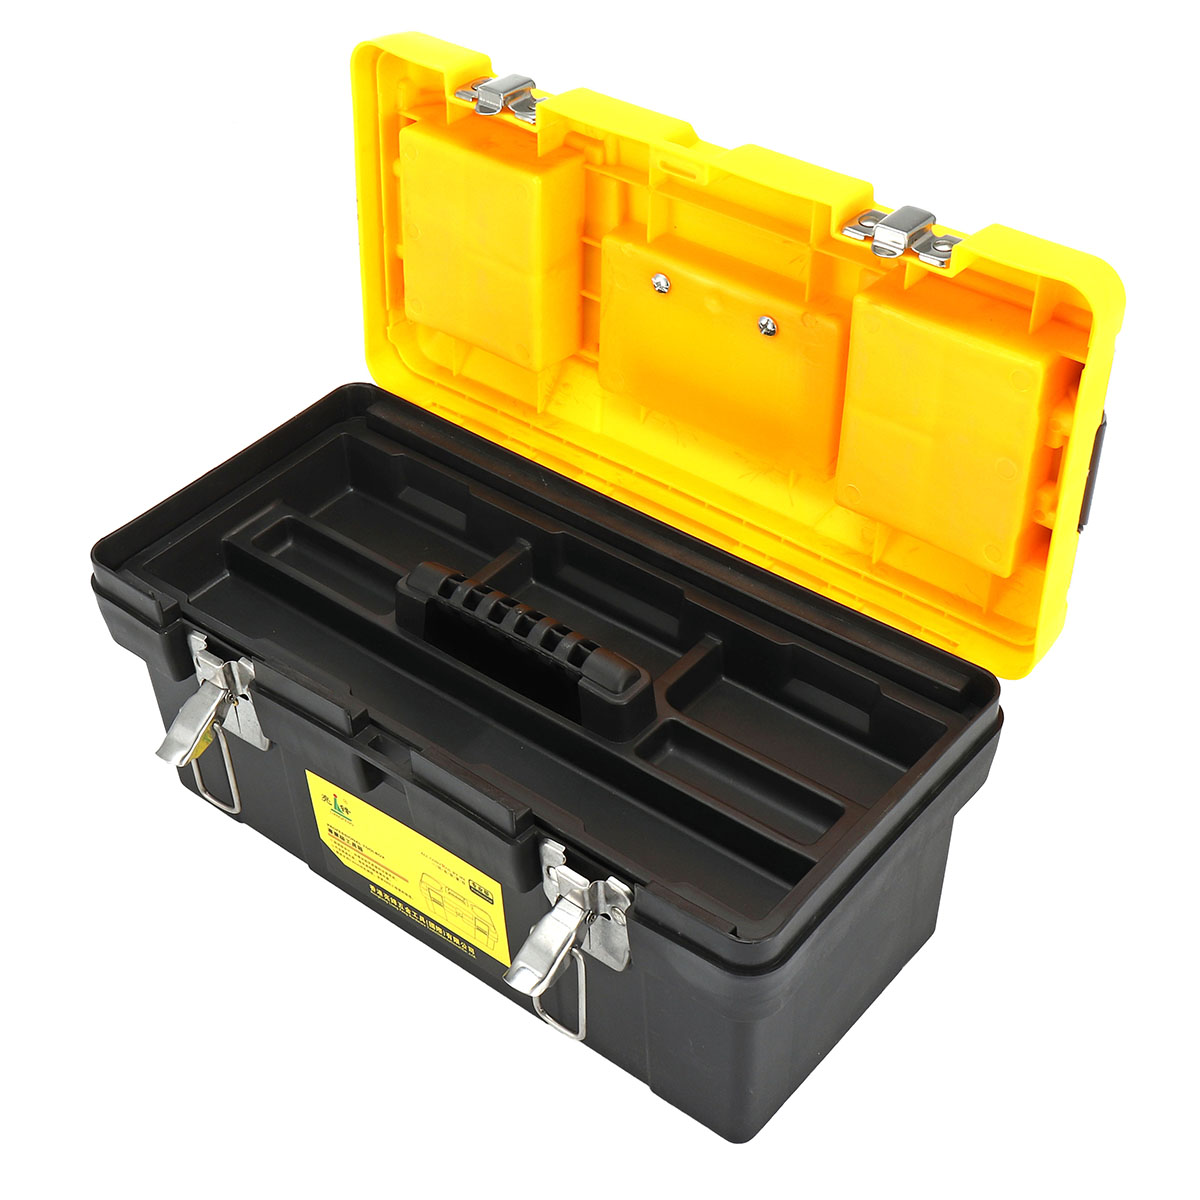 14/17/19 Inch Plastic Work Tools Storage Box Protable Carrying Case Handle Accessories Holder